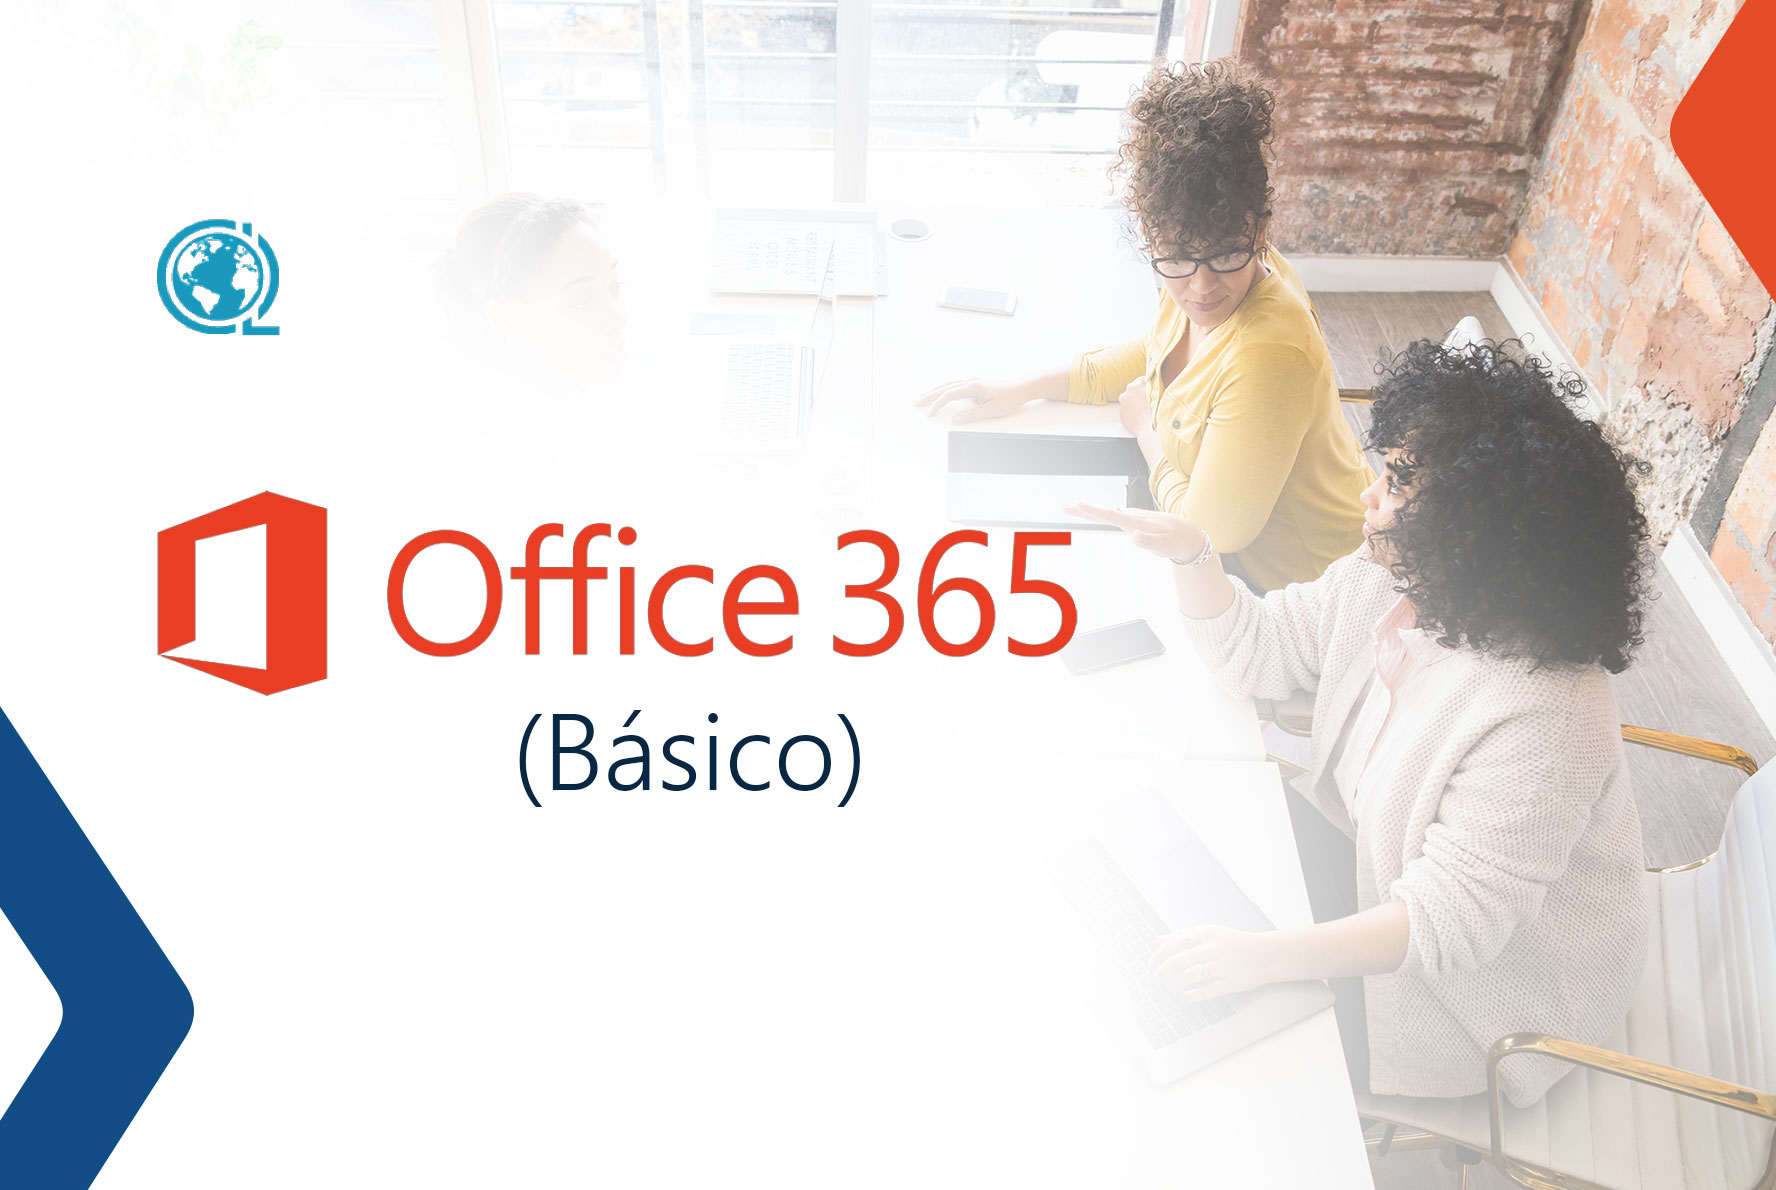  Use and use of Office 365 in the company (Basic tools)